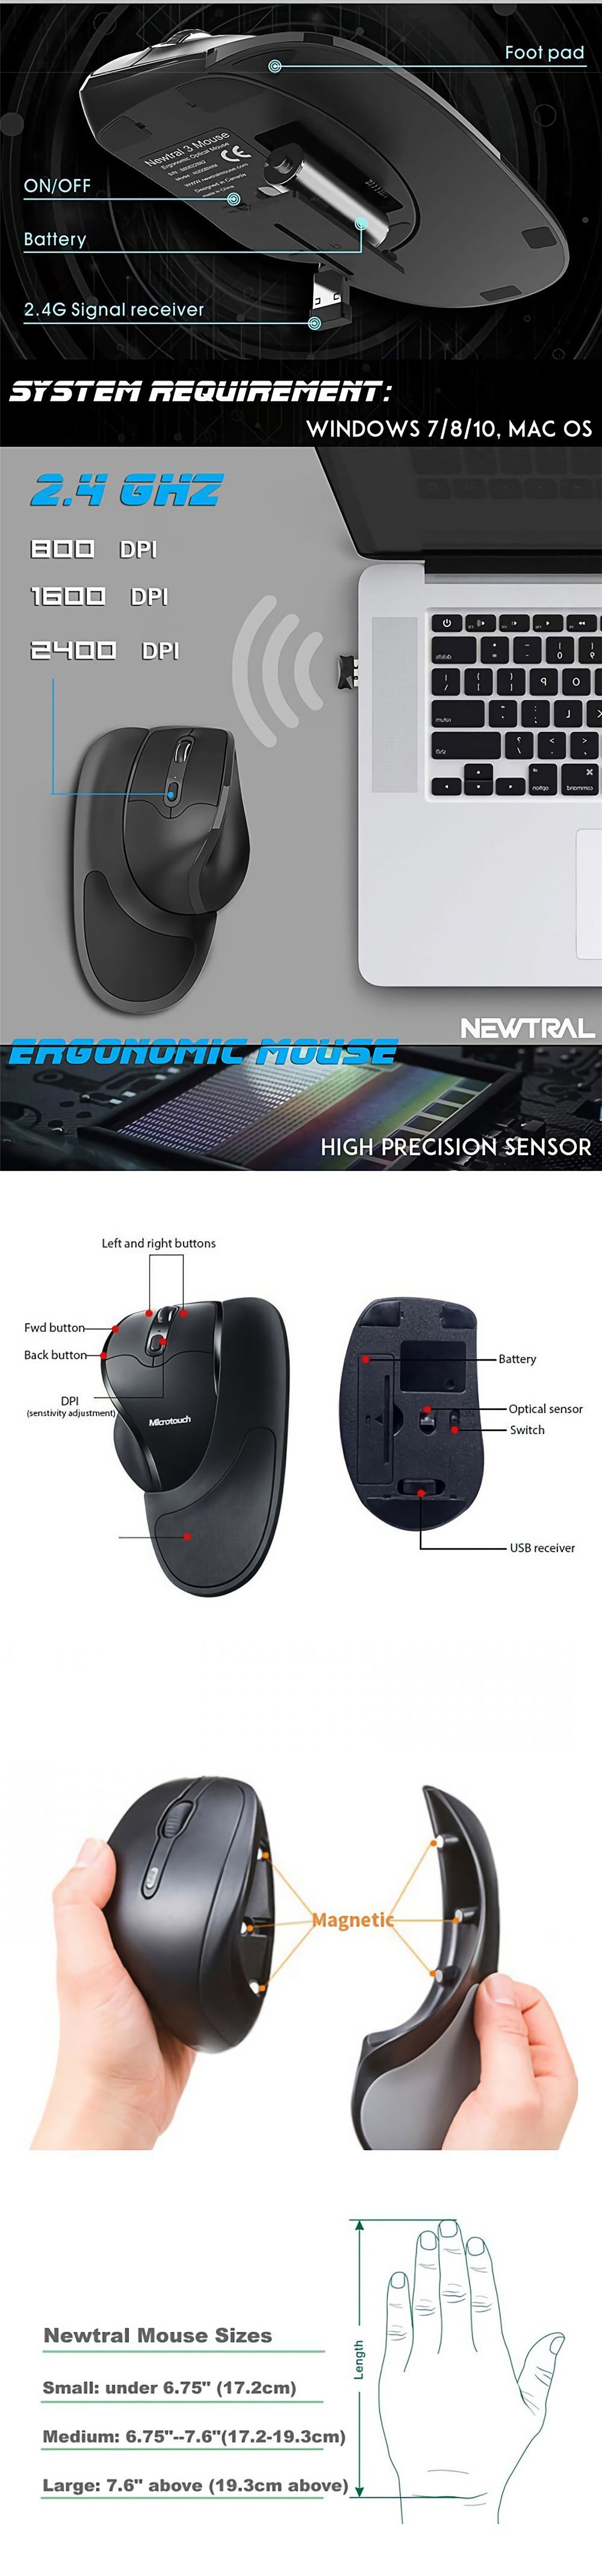 Newtral-N300LWM-24GHz-Wireless-Left-Hand-Mouse-2400DPI-Ergonomic-Gaming-Mouse-Home-Office-Mouce-for--1673287